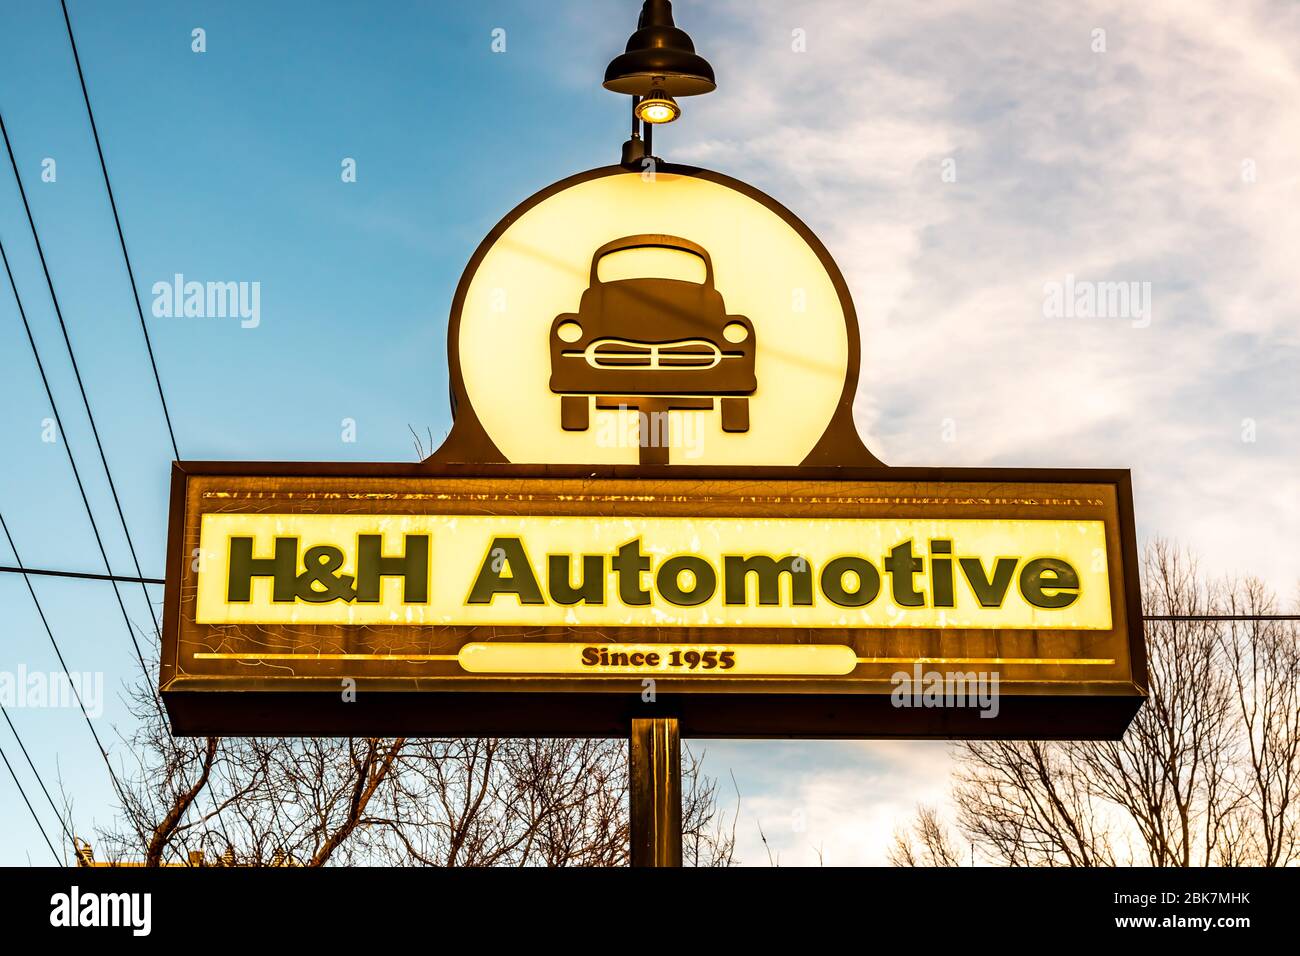 Horizontally oriented shot of distinctive vintage 'H&H Automotive' freestanding sign showing brand and logo in brown and beige. Stock Photo